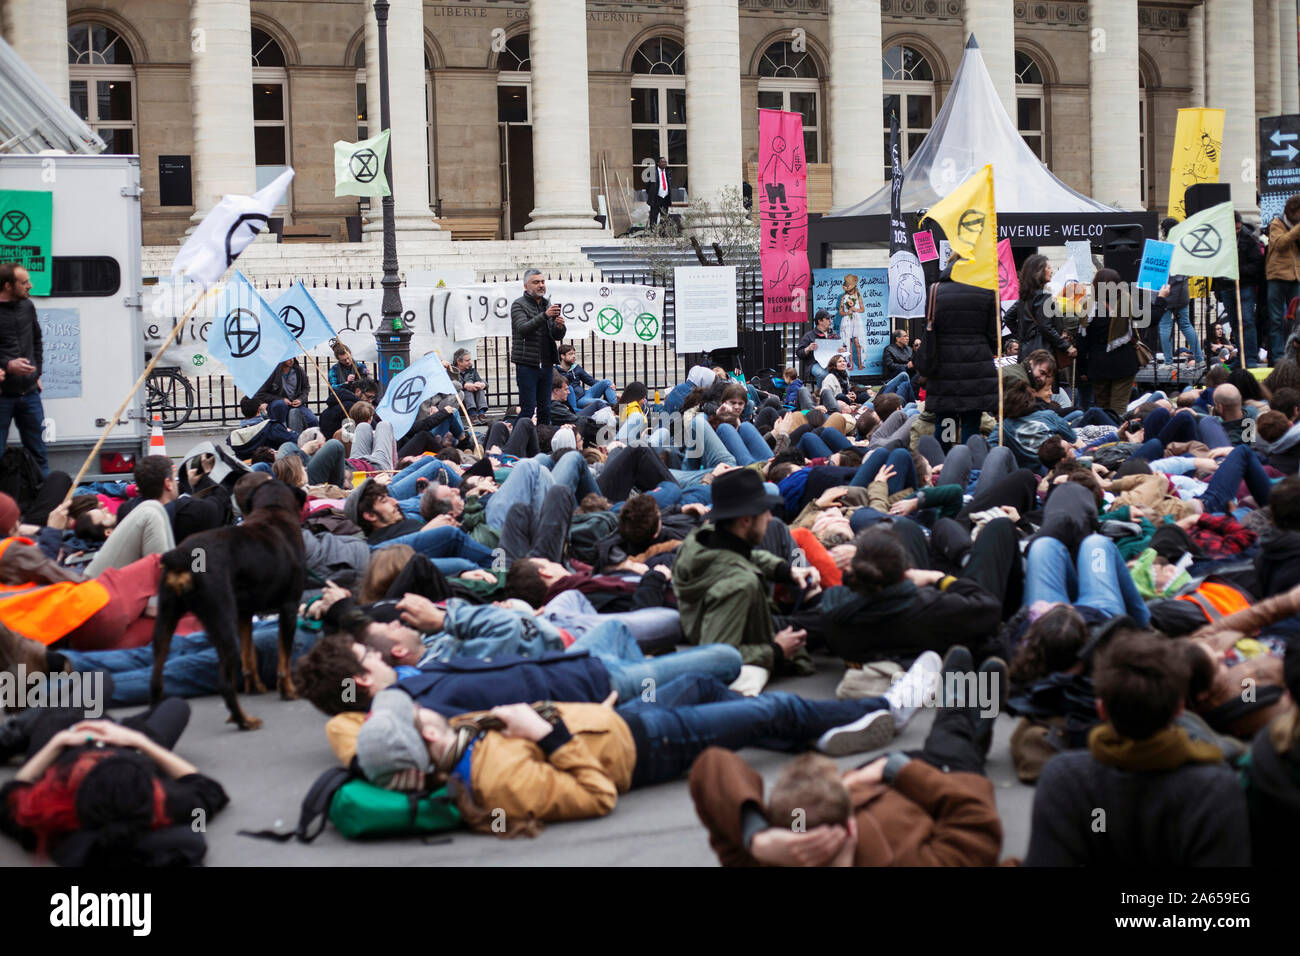 Paris (France), launching of the socio-political movement 'Extinction Rebellion' which uses nonviolent resistance to protest against climate breakdown Stock Photo